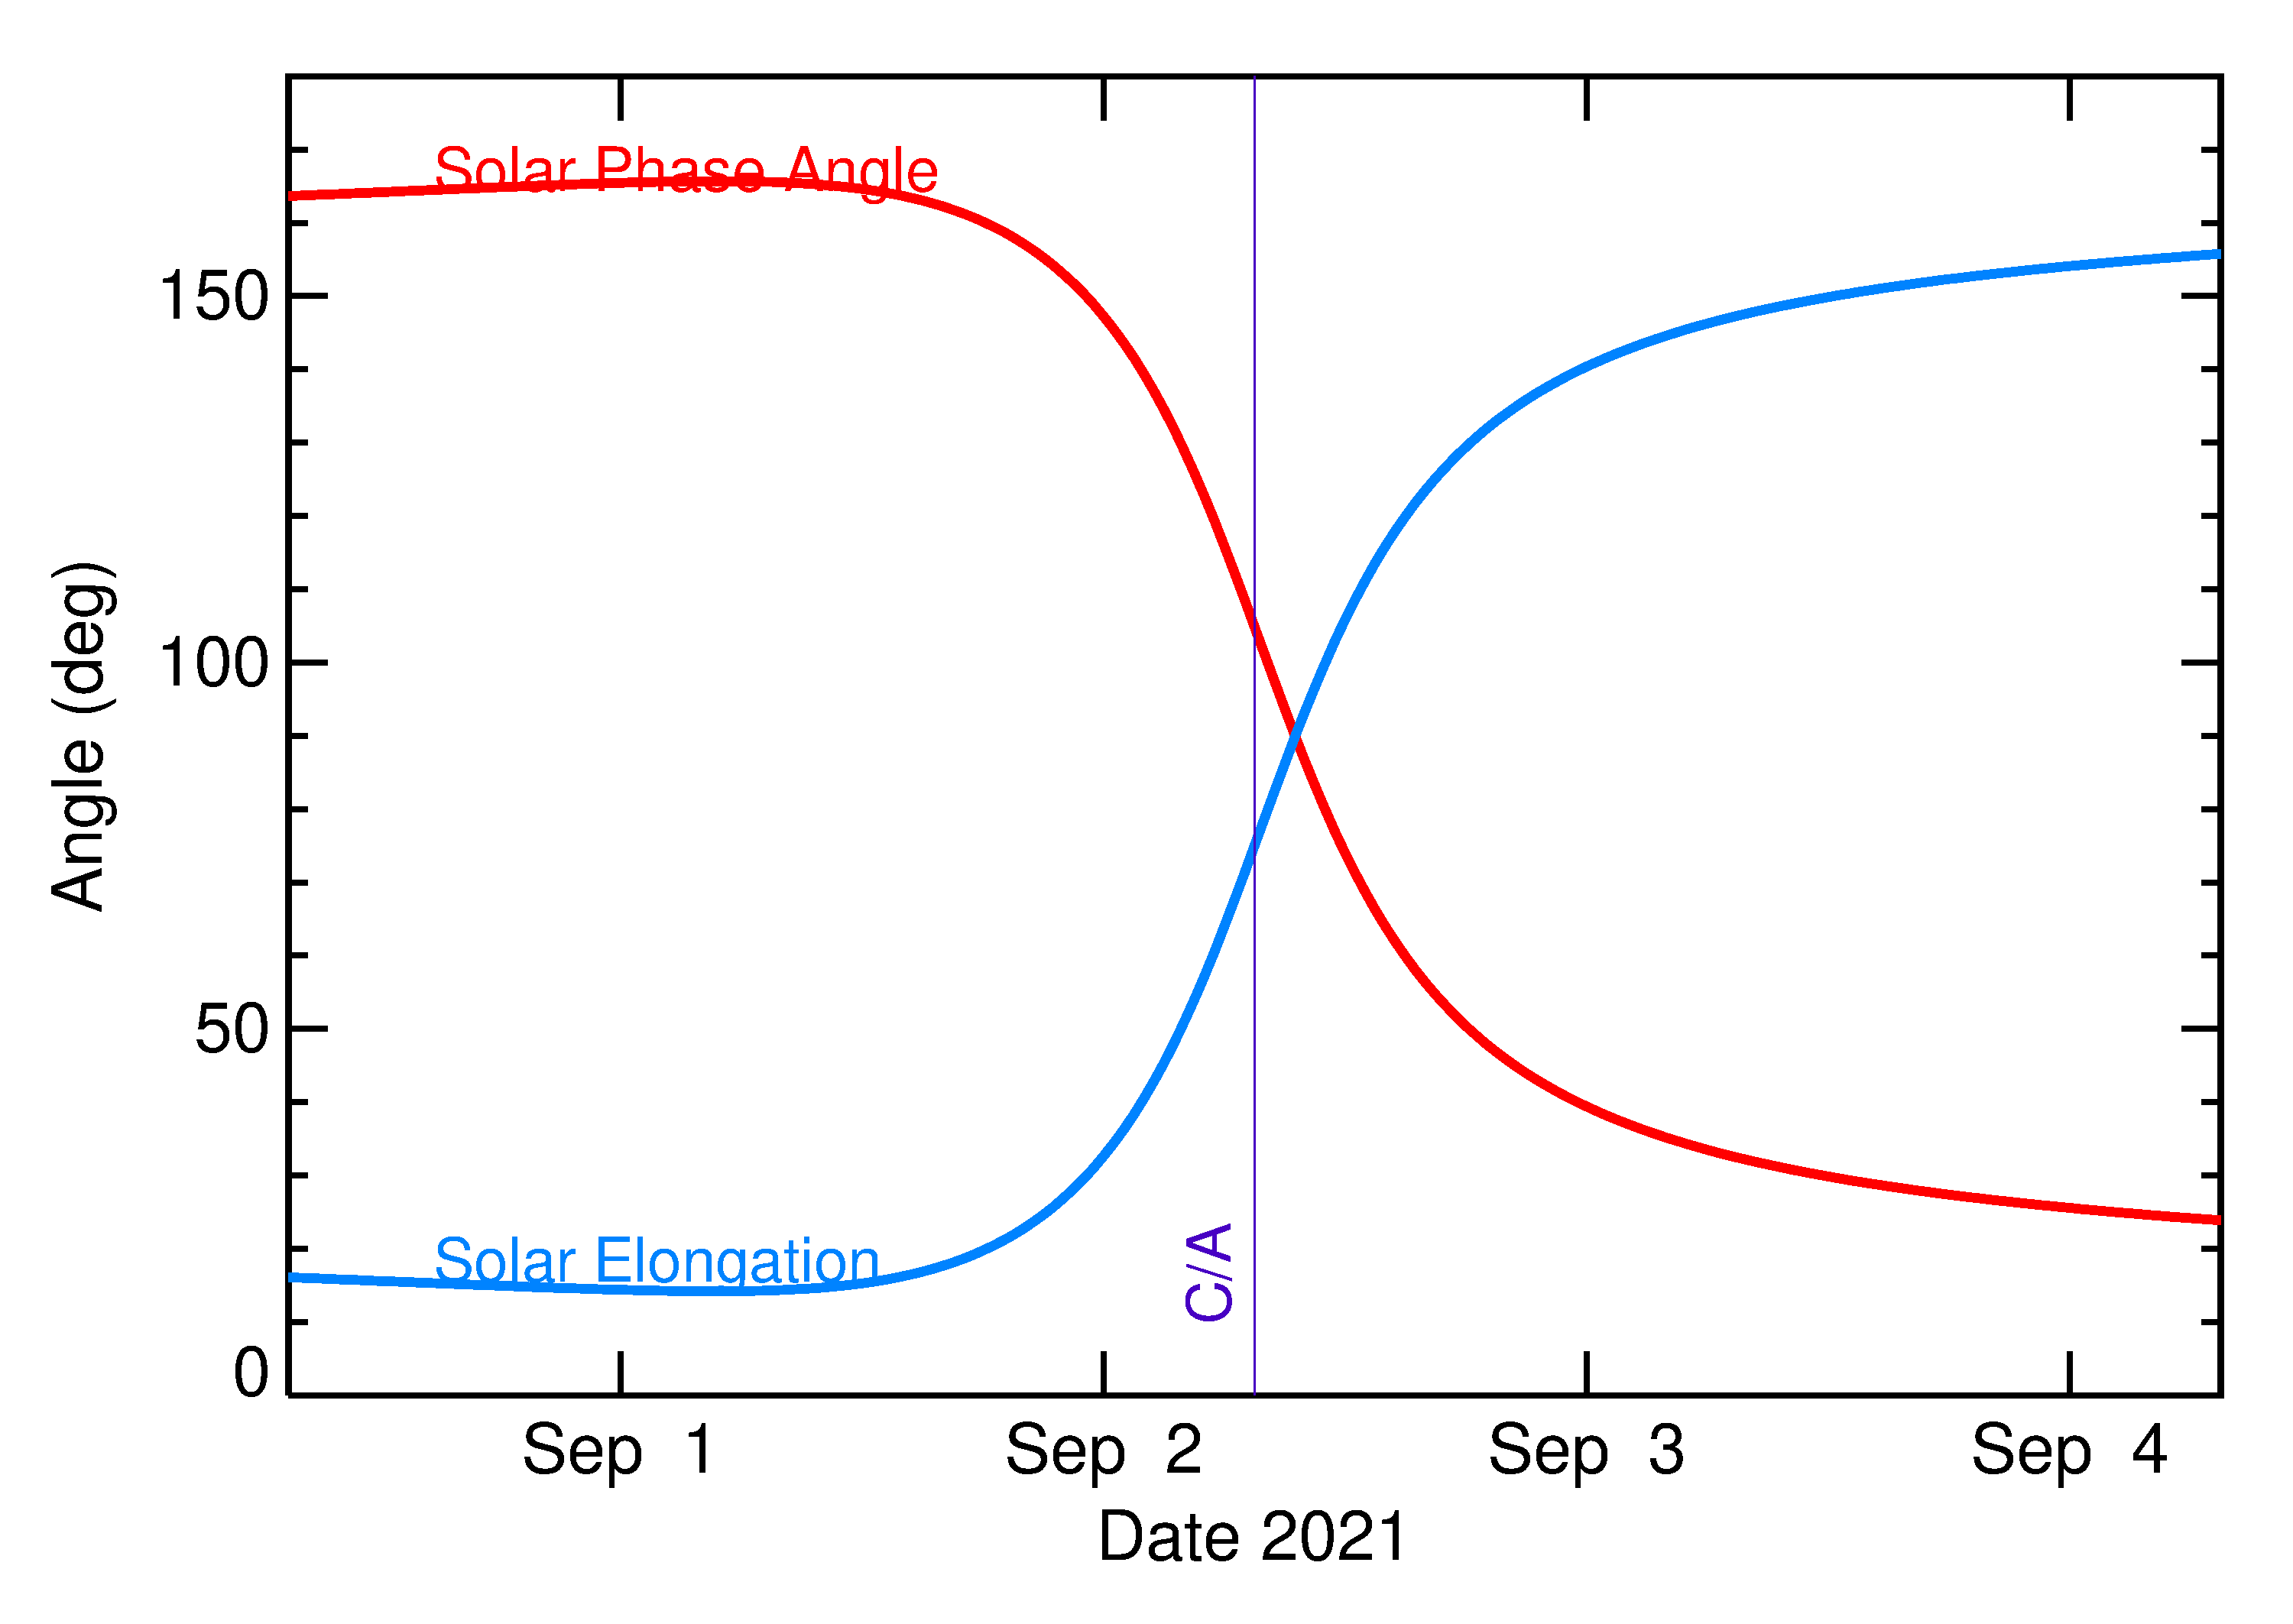 Solar Elongation and Solar Phase Angle of 2021 RJ1 in the days around closest approach